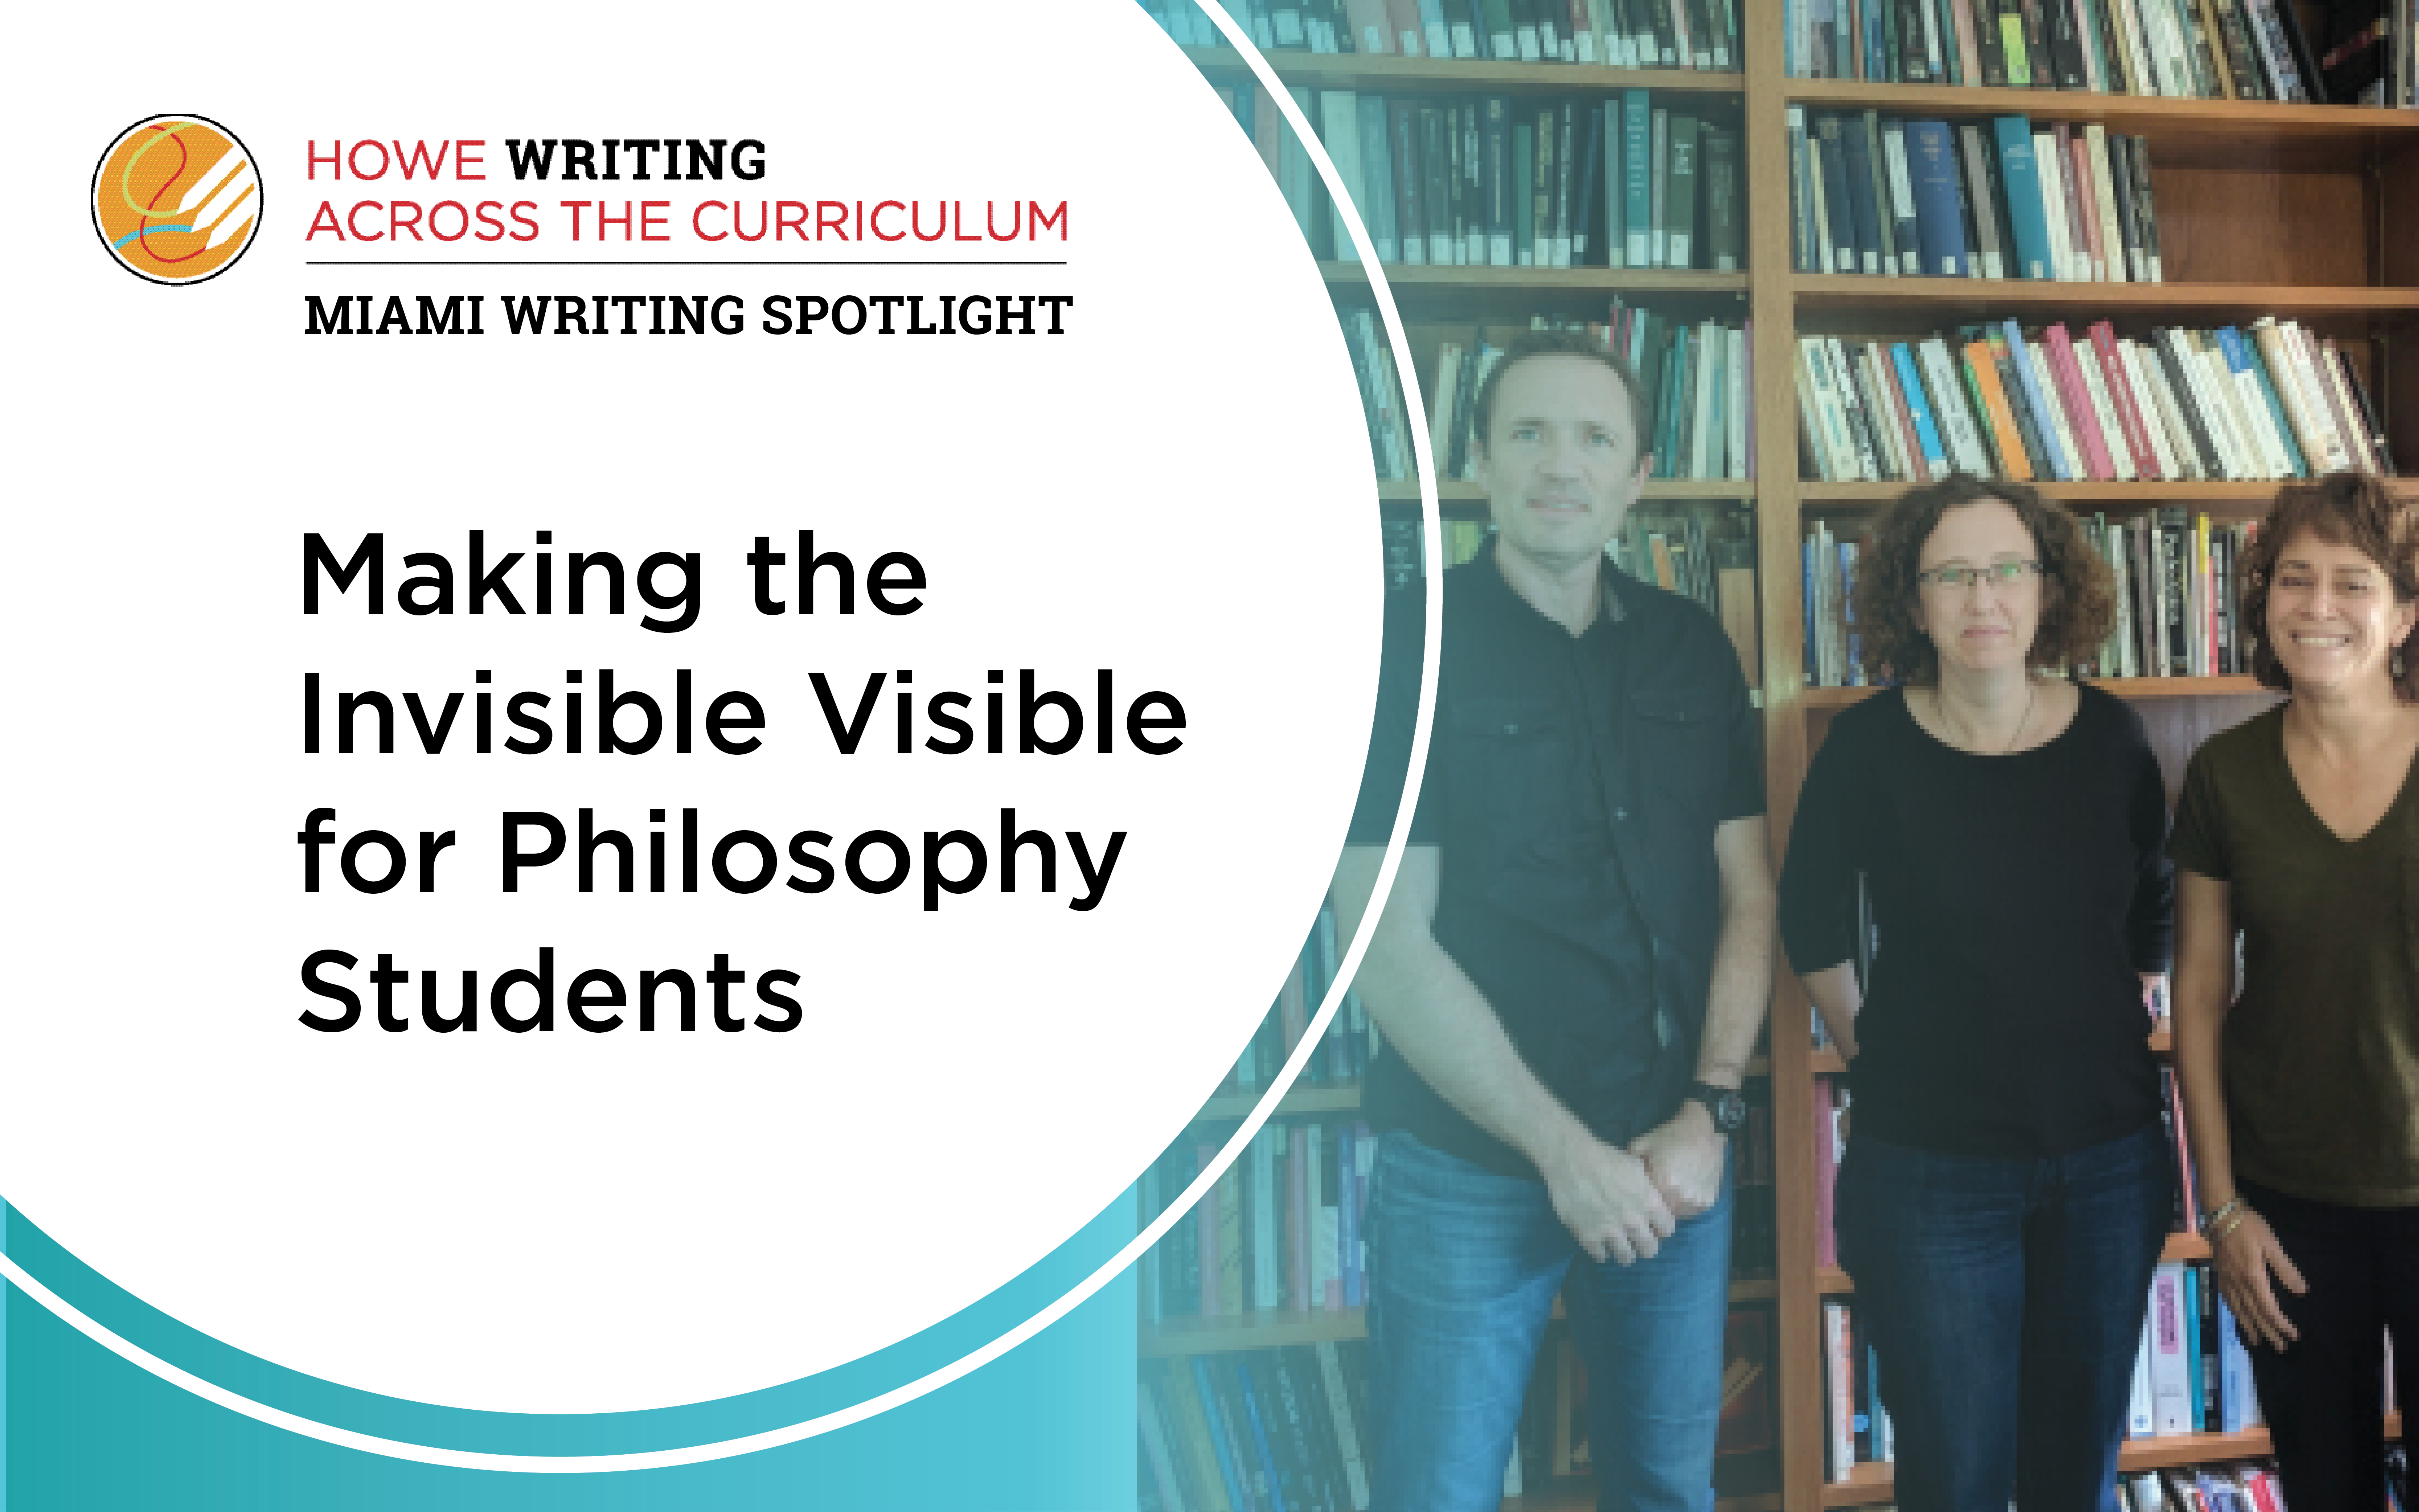 Making the Invisible Visible for Philosophy Students